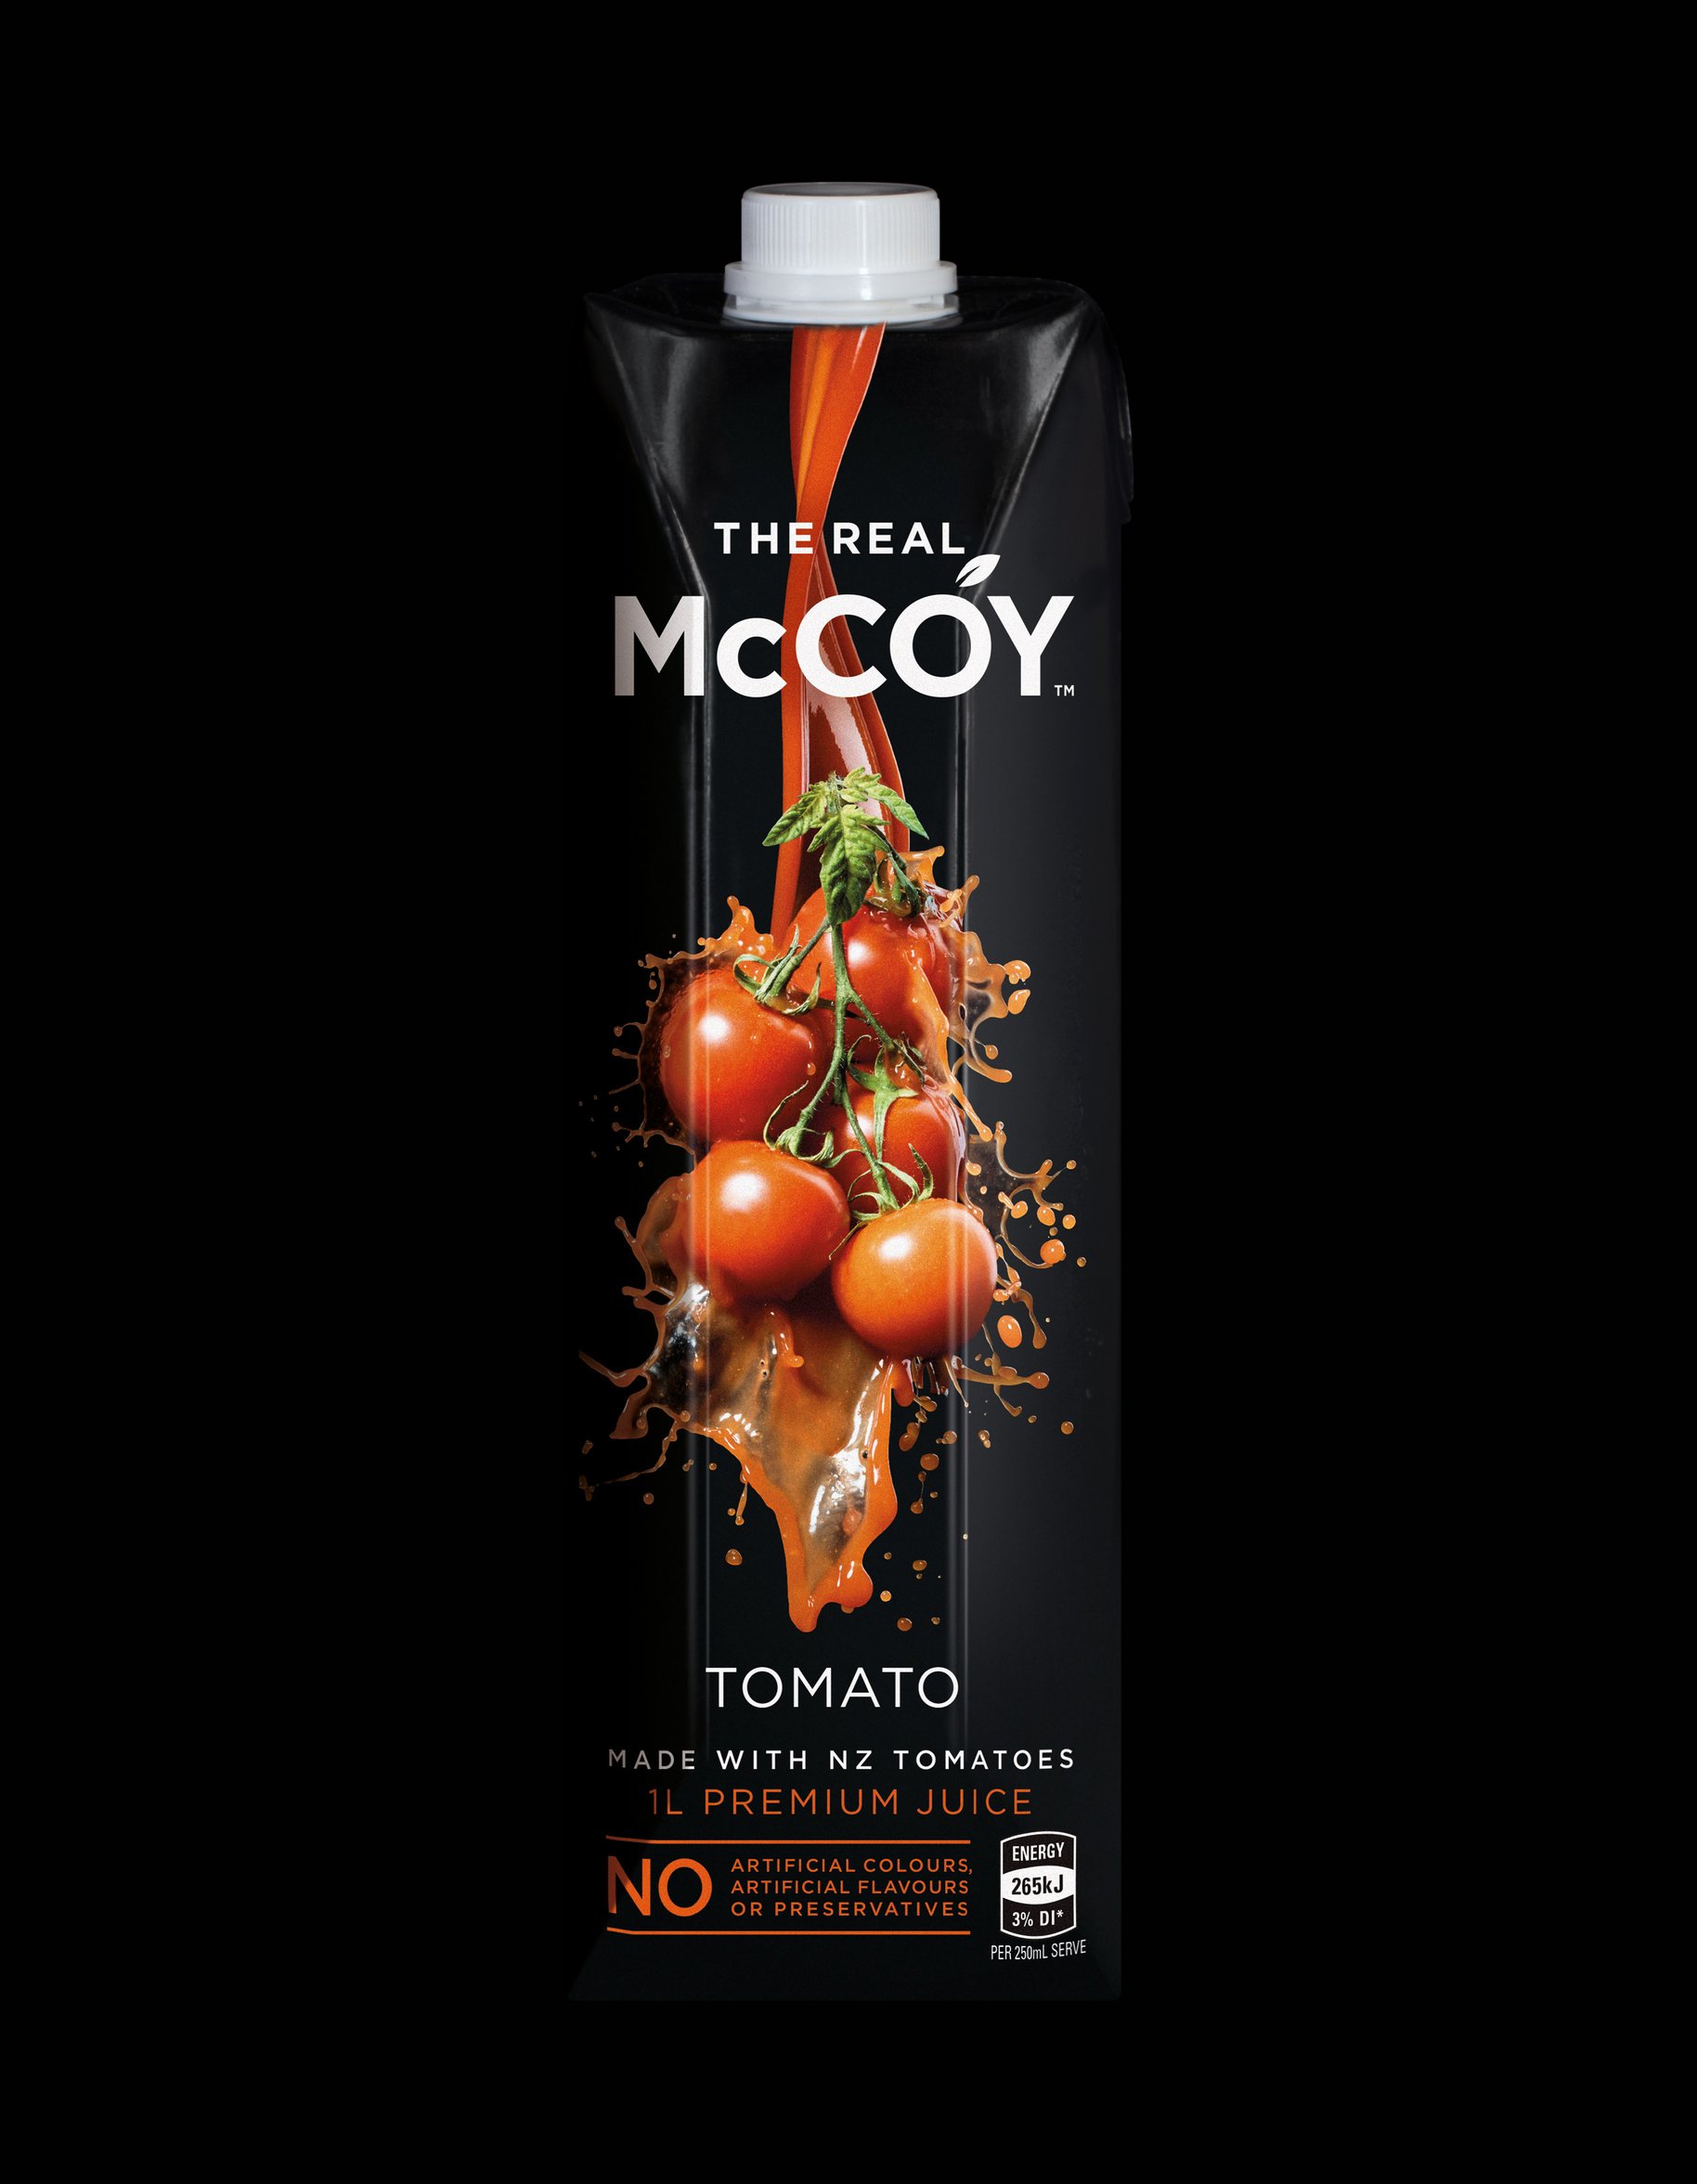 McCoy 1L tetra tomato juice packaging